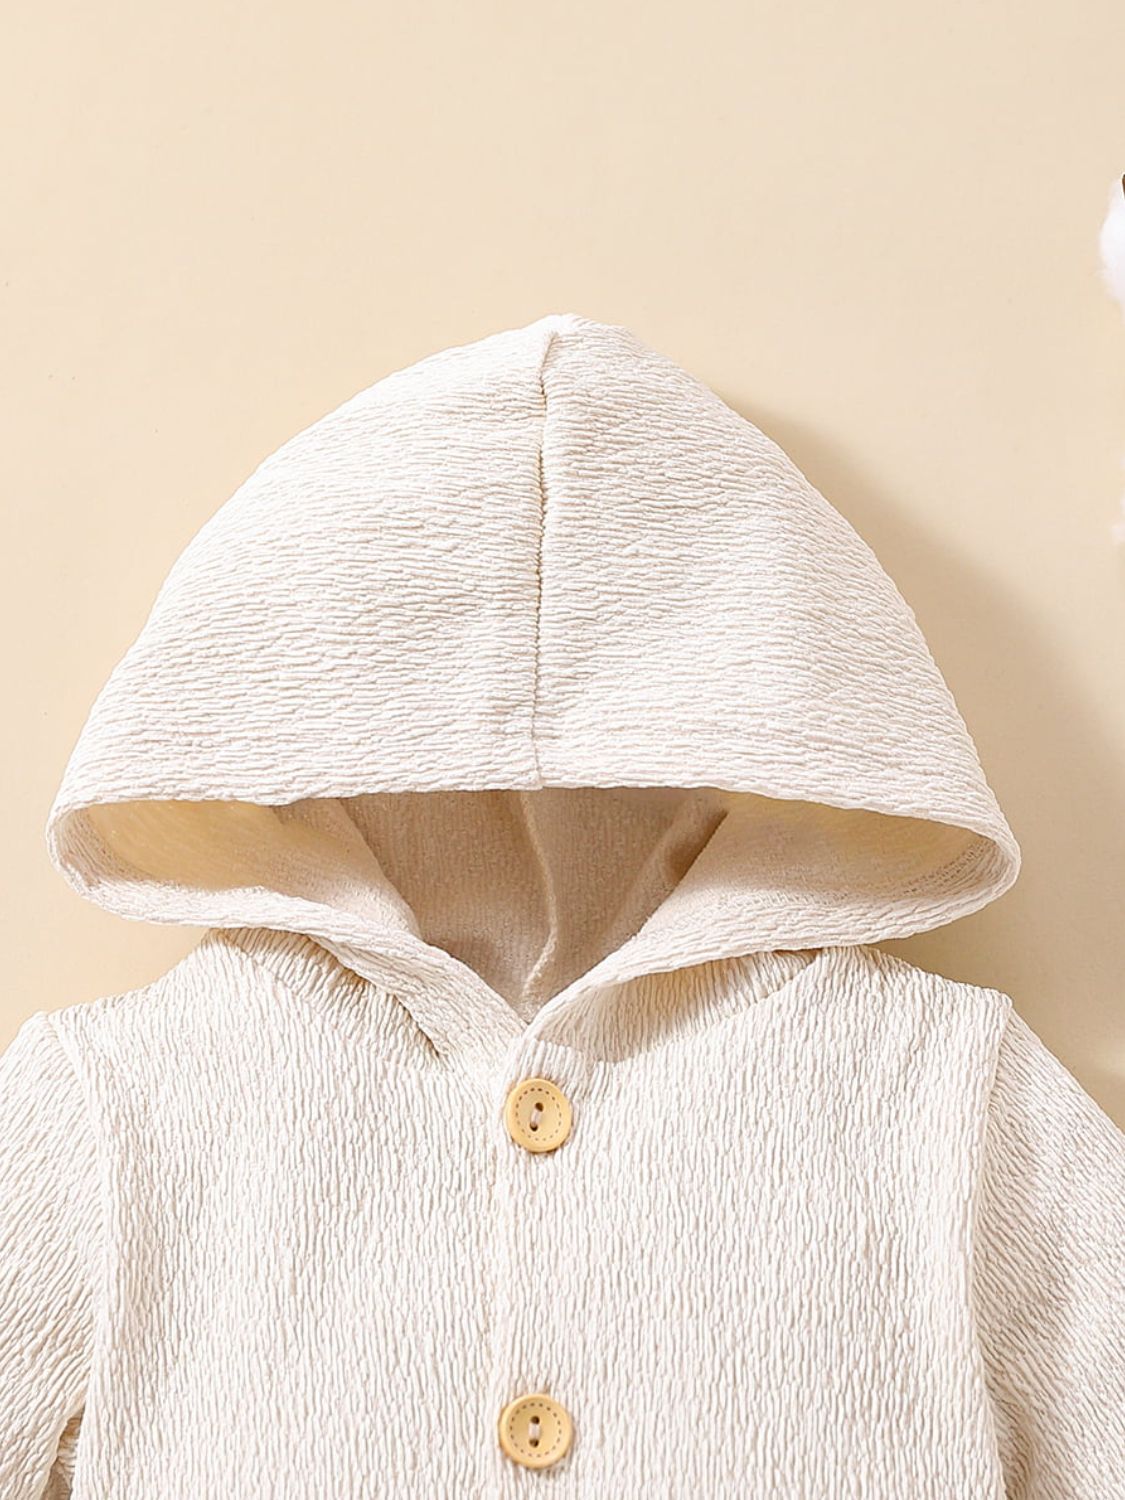 Baby Textured Button Front Hooded Jumpsuit with Pockets - DromedarShop.com Online Boutique